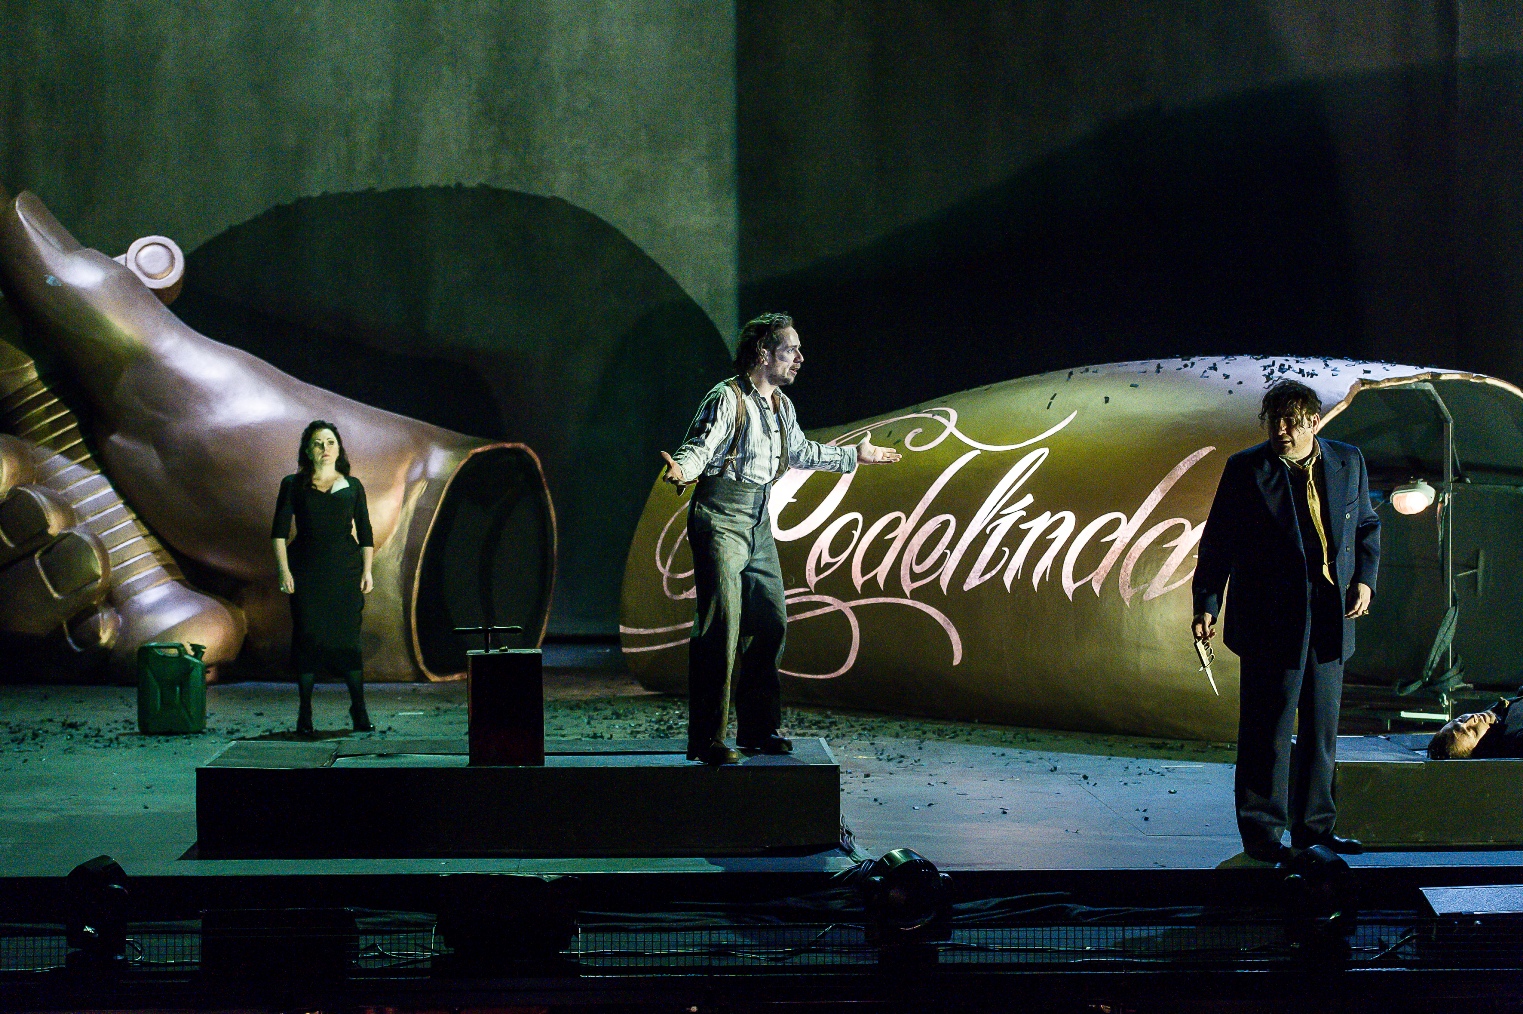 Scene from Act Three of ENO's Rodelinda, photo by Clive Barda